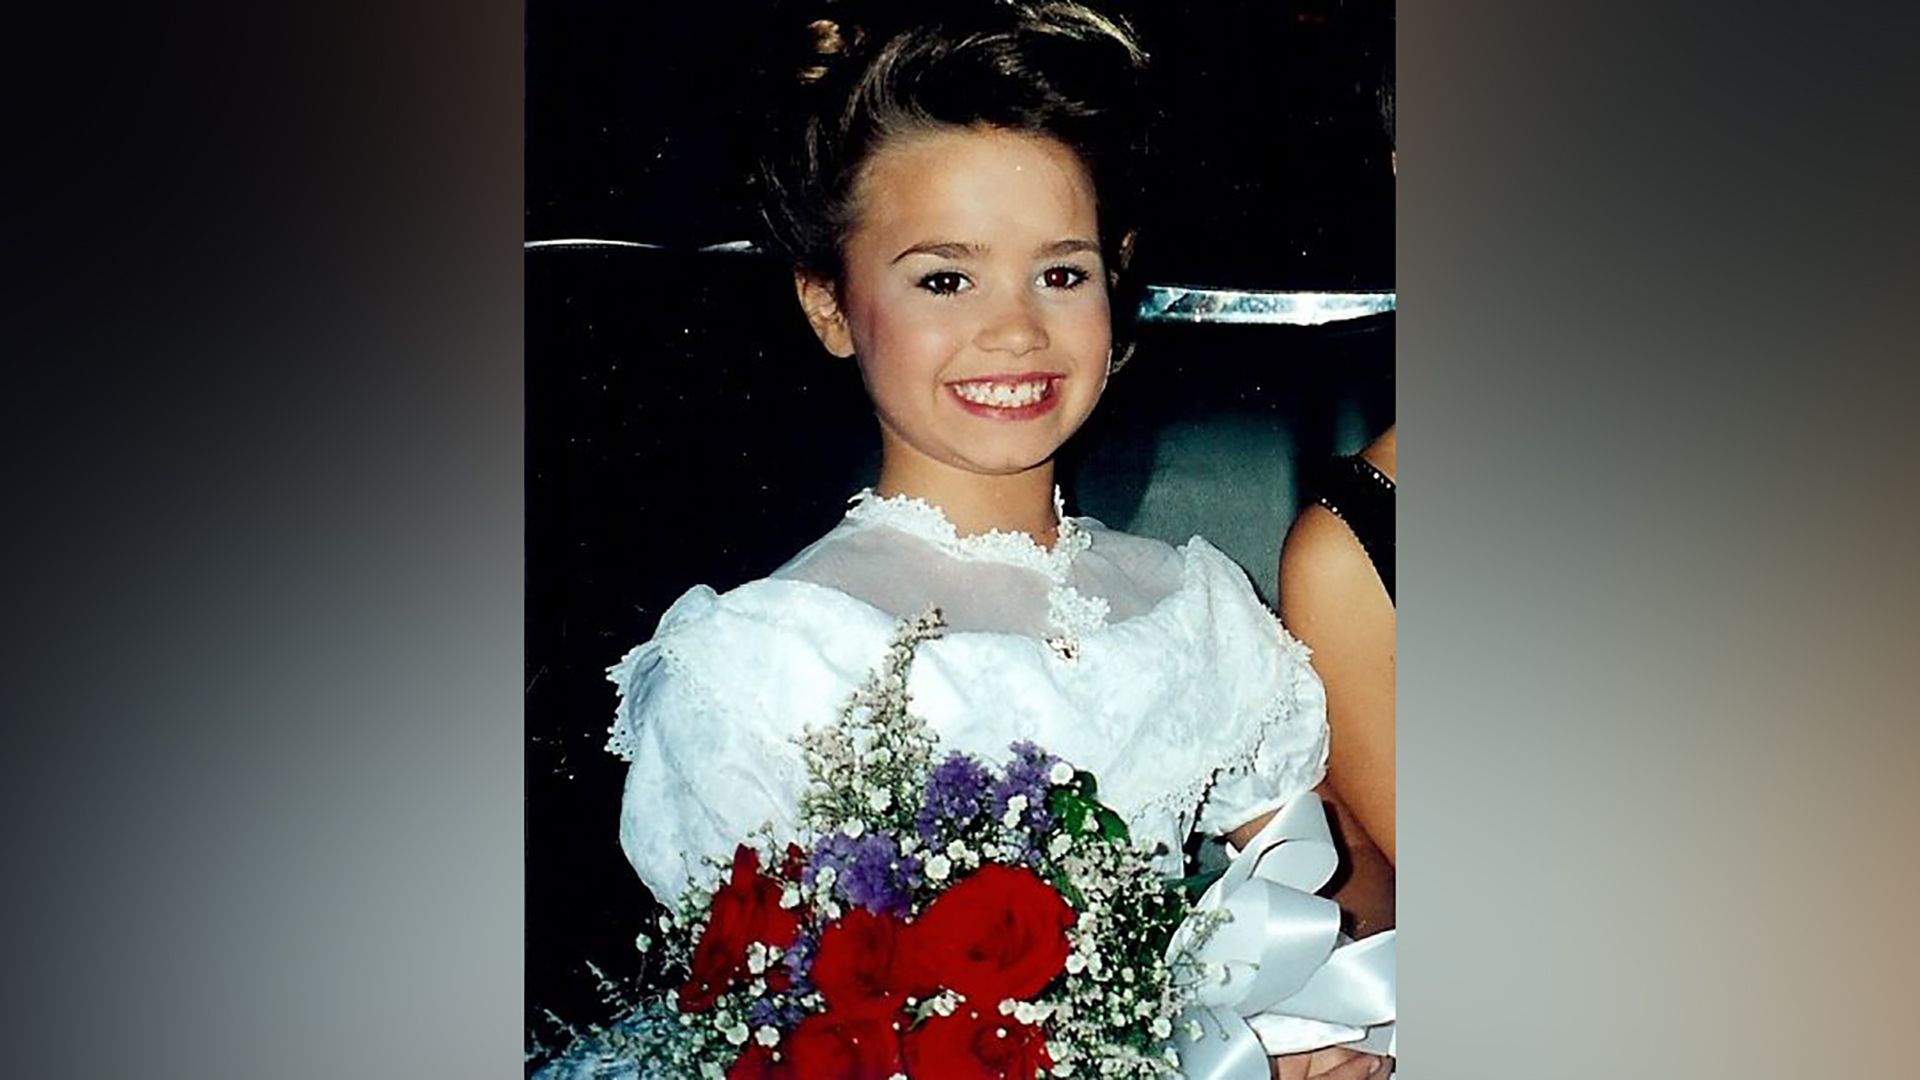 Demi Lovato has been a real beauty since childhood